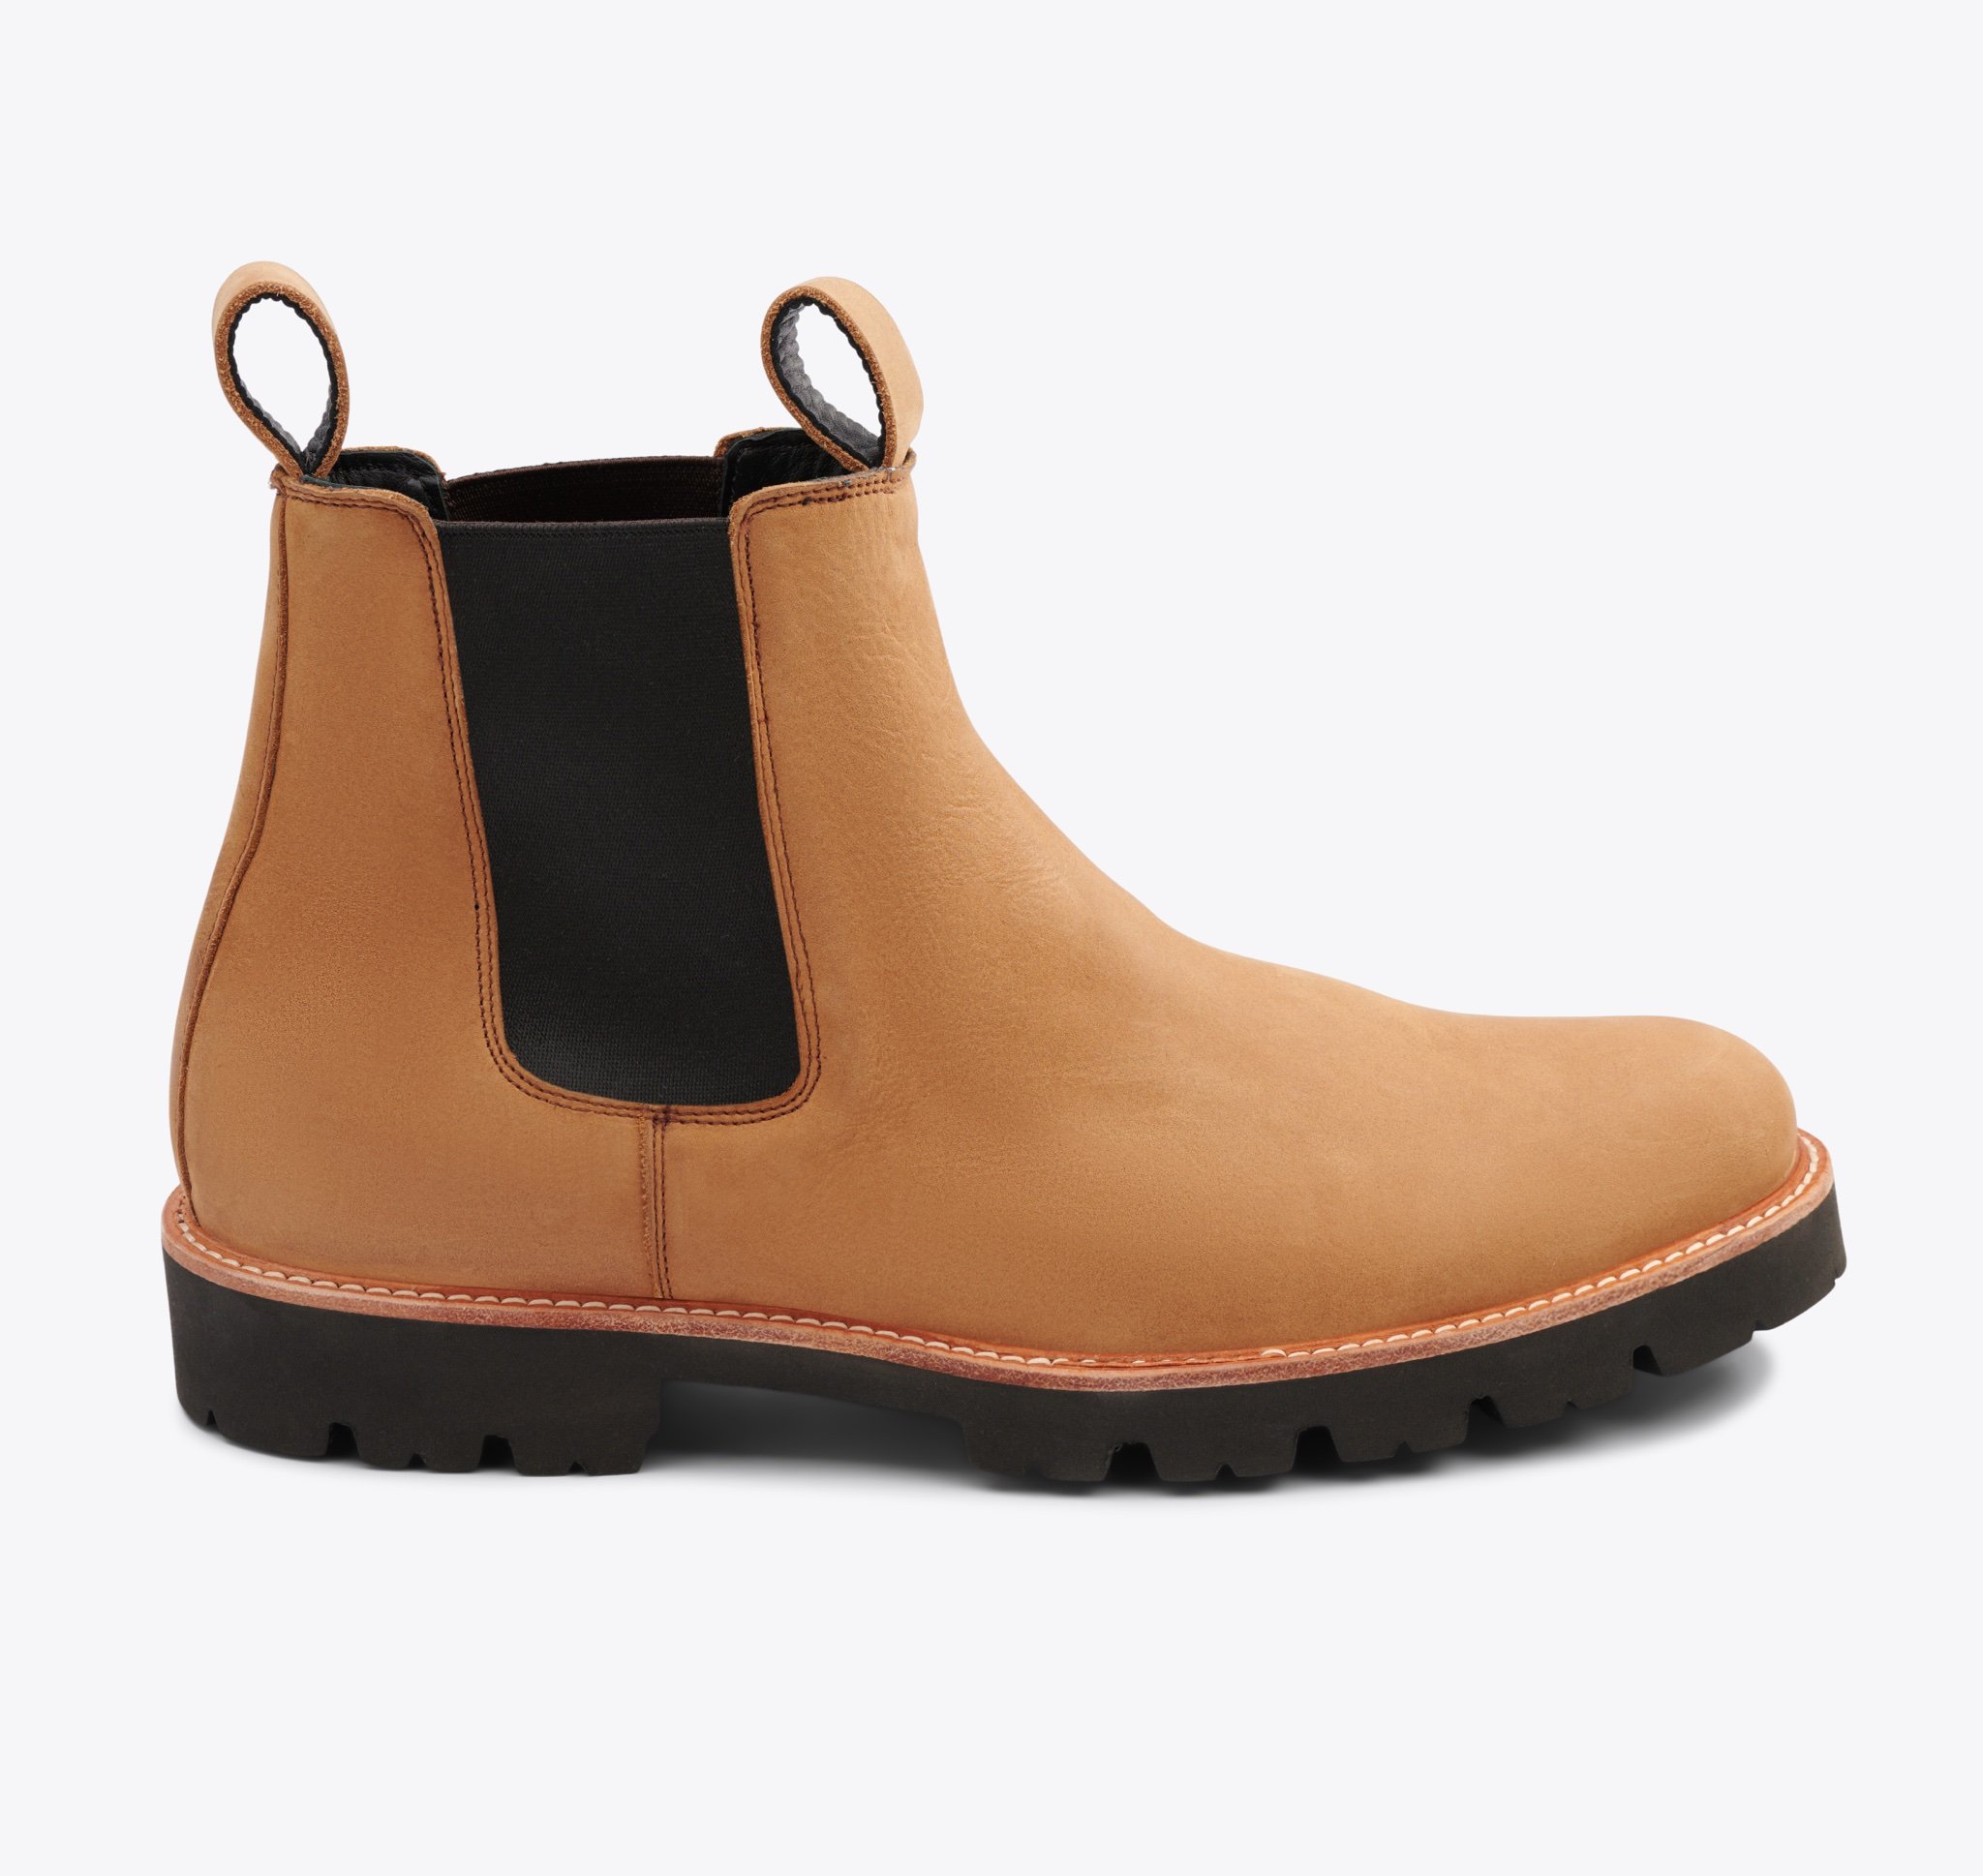 Nisolo Go-To Chelsea Boot Tobacco - Every Nisolo product is built on the foundation of comfort, function, and design. 